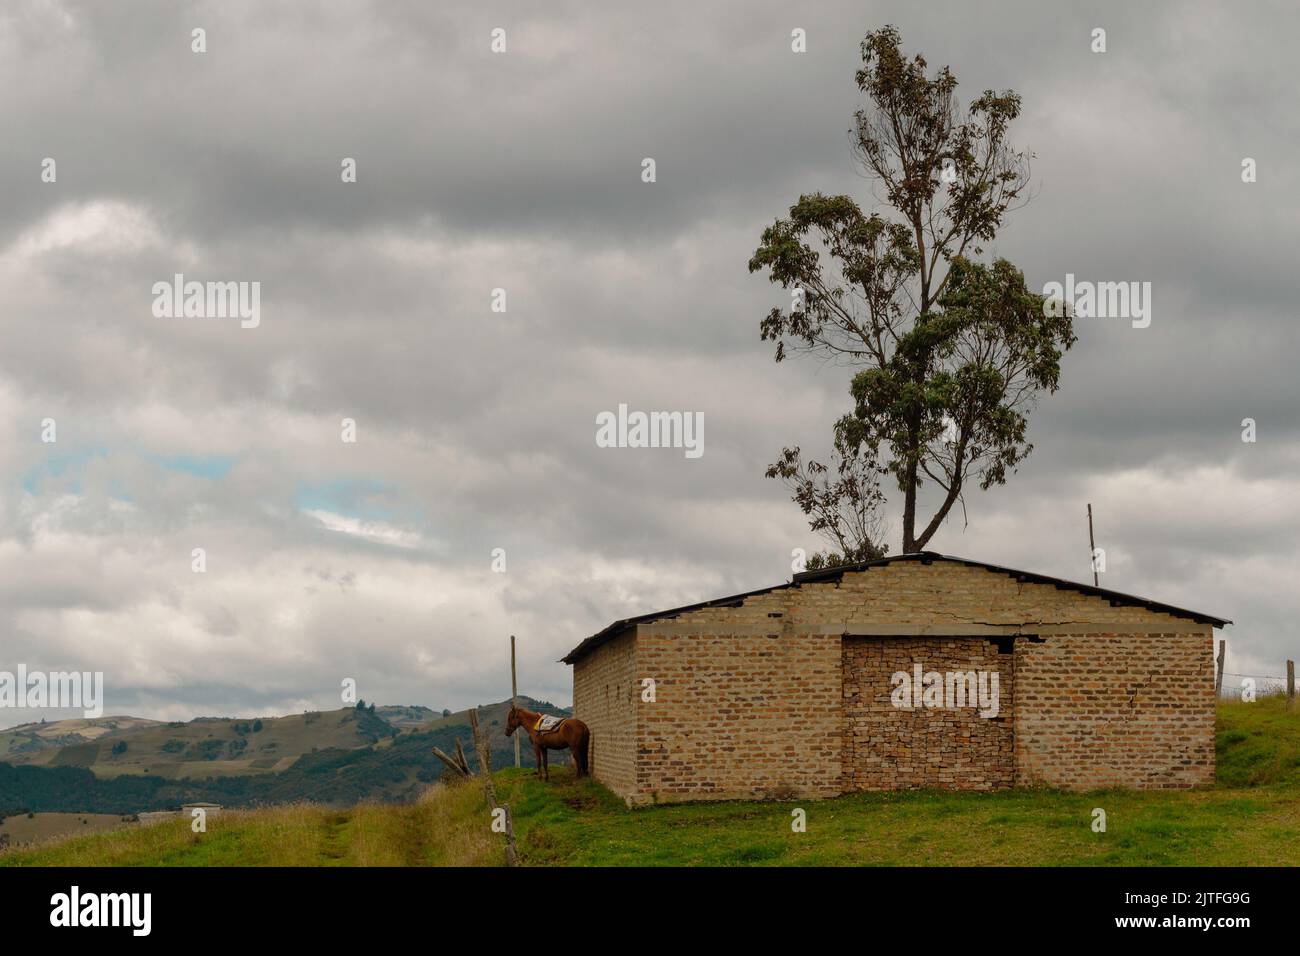 An old brick barn isolated, a high tree, a cloudy sky and a horse in the rural countryside of Choconta, Cundinamarca, Colombia. Stock Photo